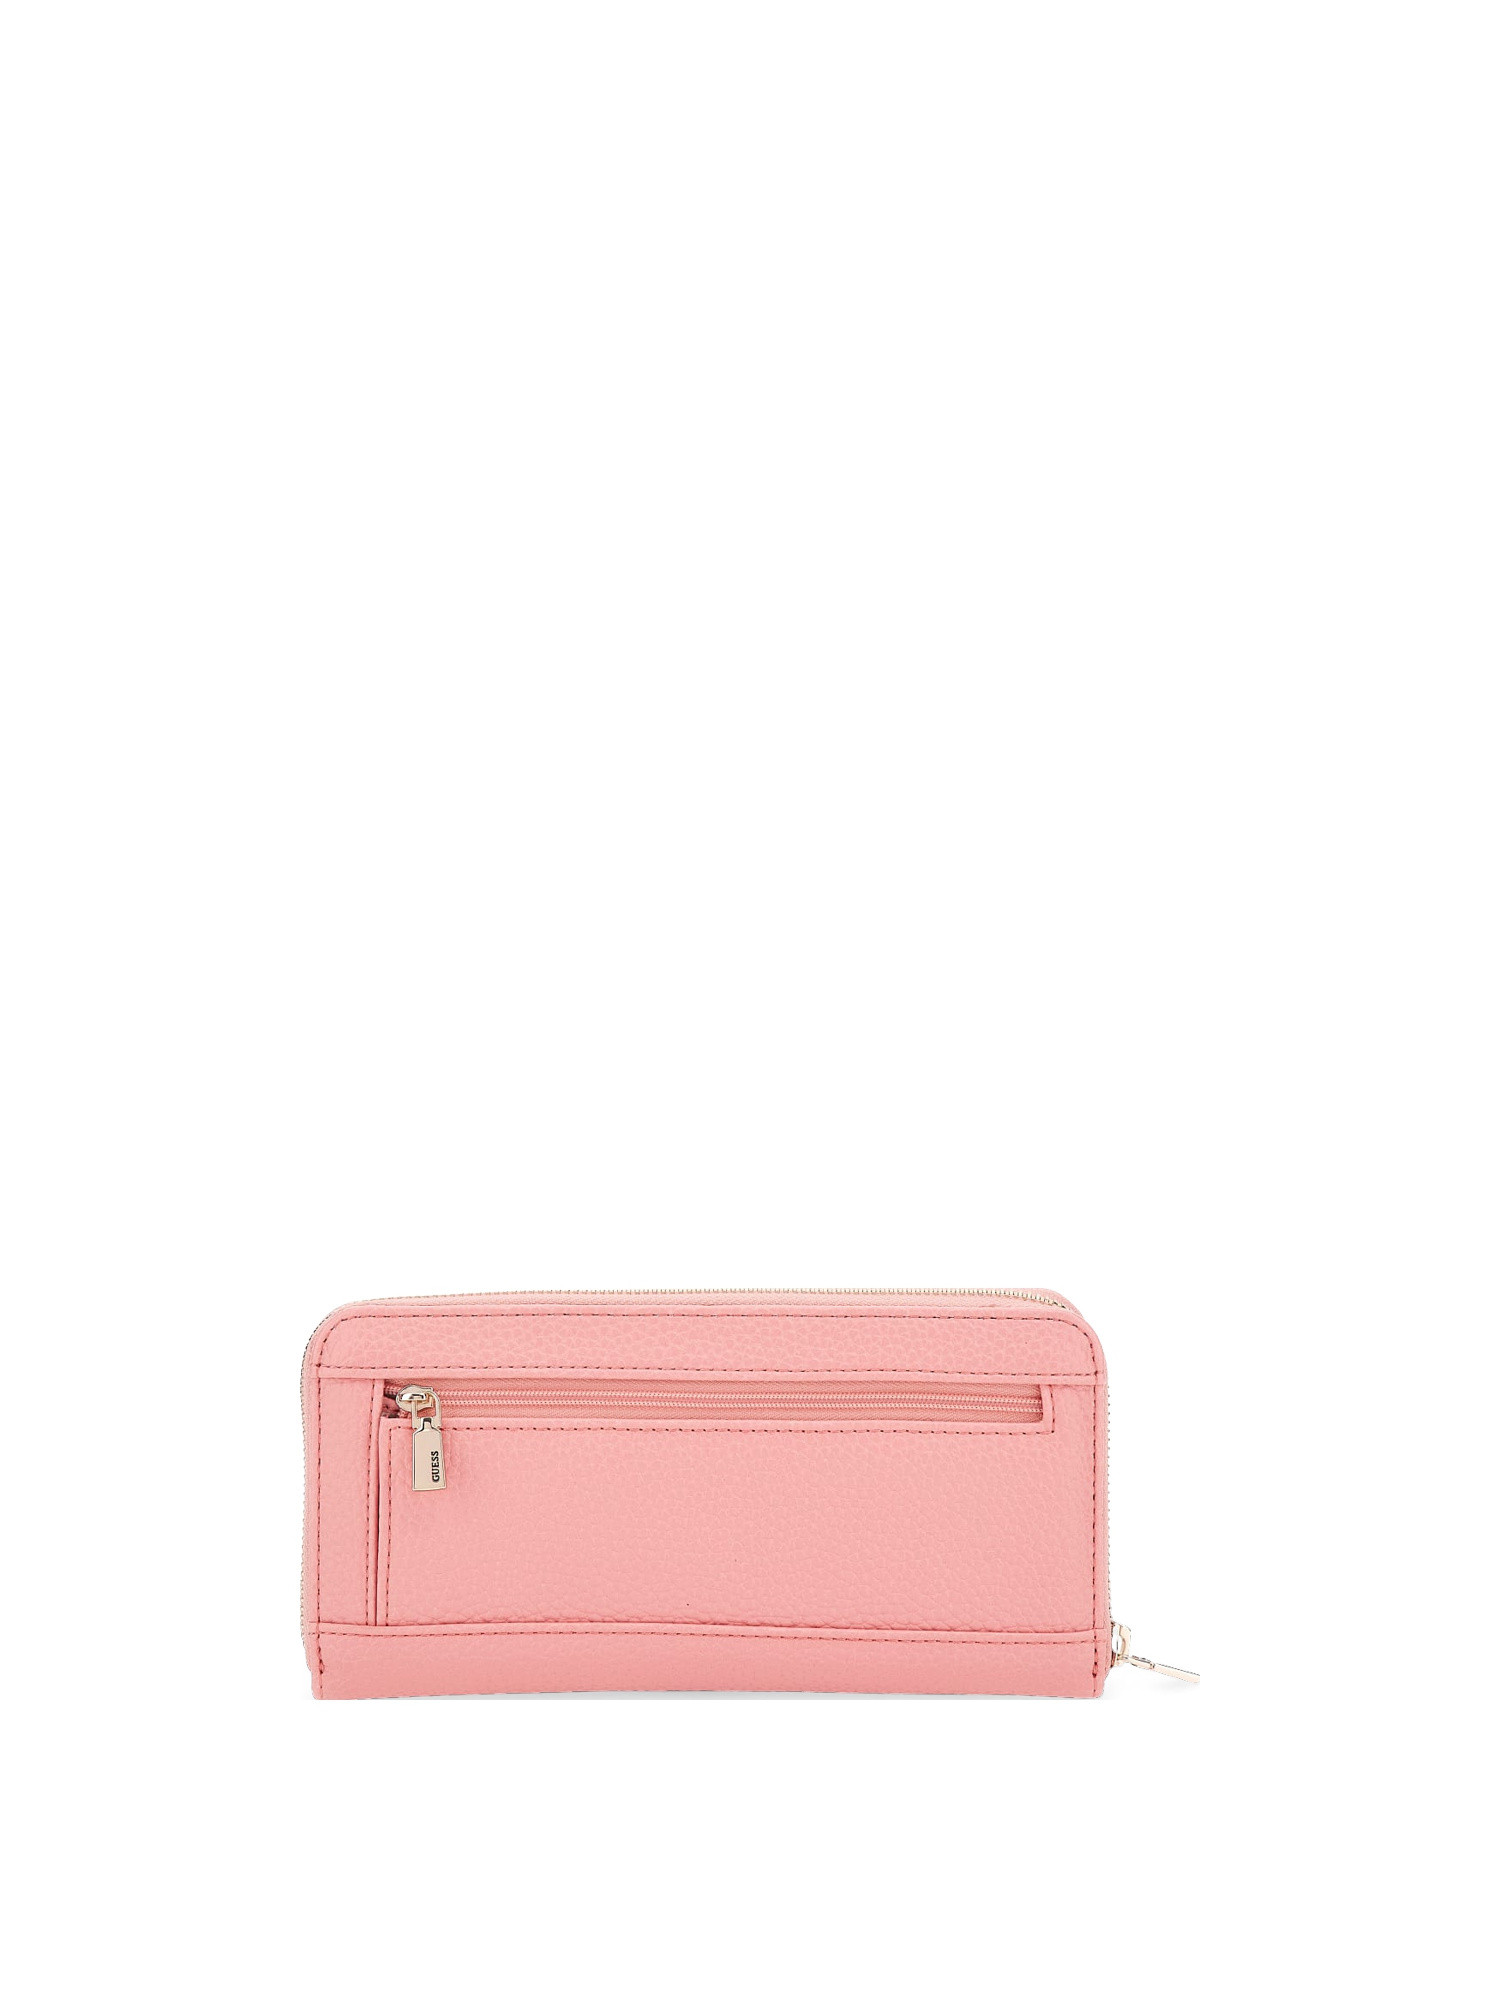 Guess - Brenton eco maxi wallet, Pink, large image number 1